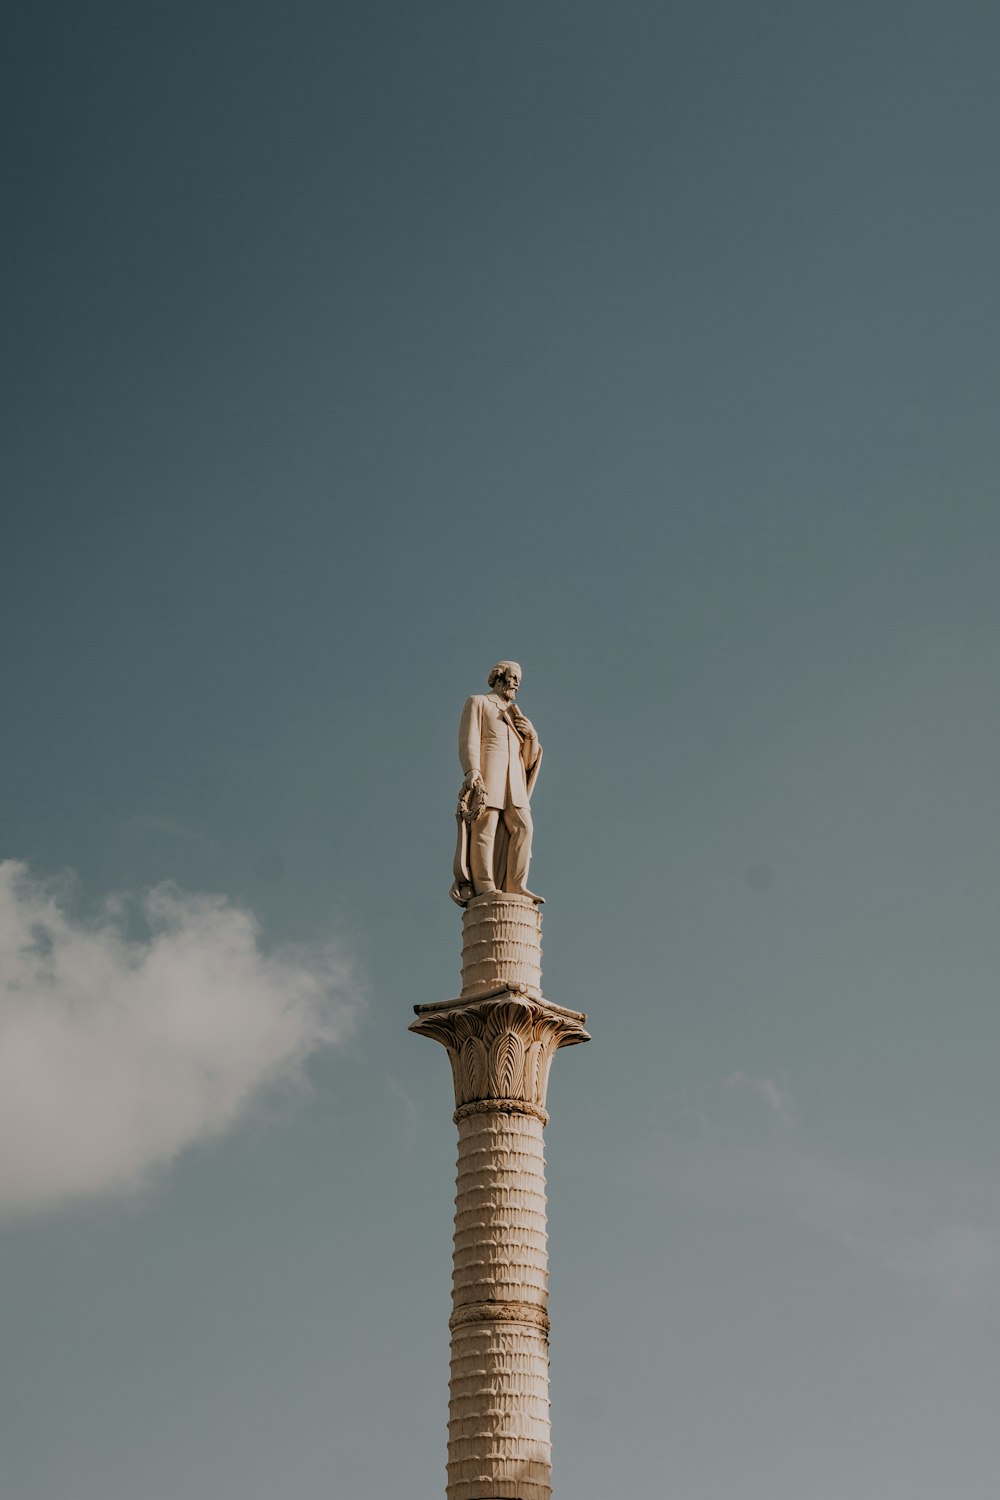 a statue of a man standing on top of a tower